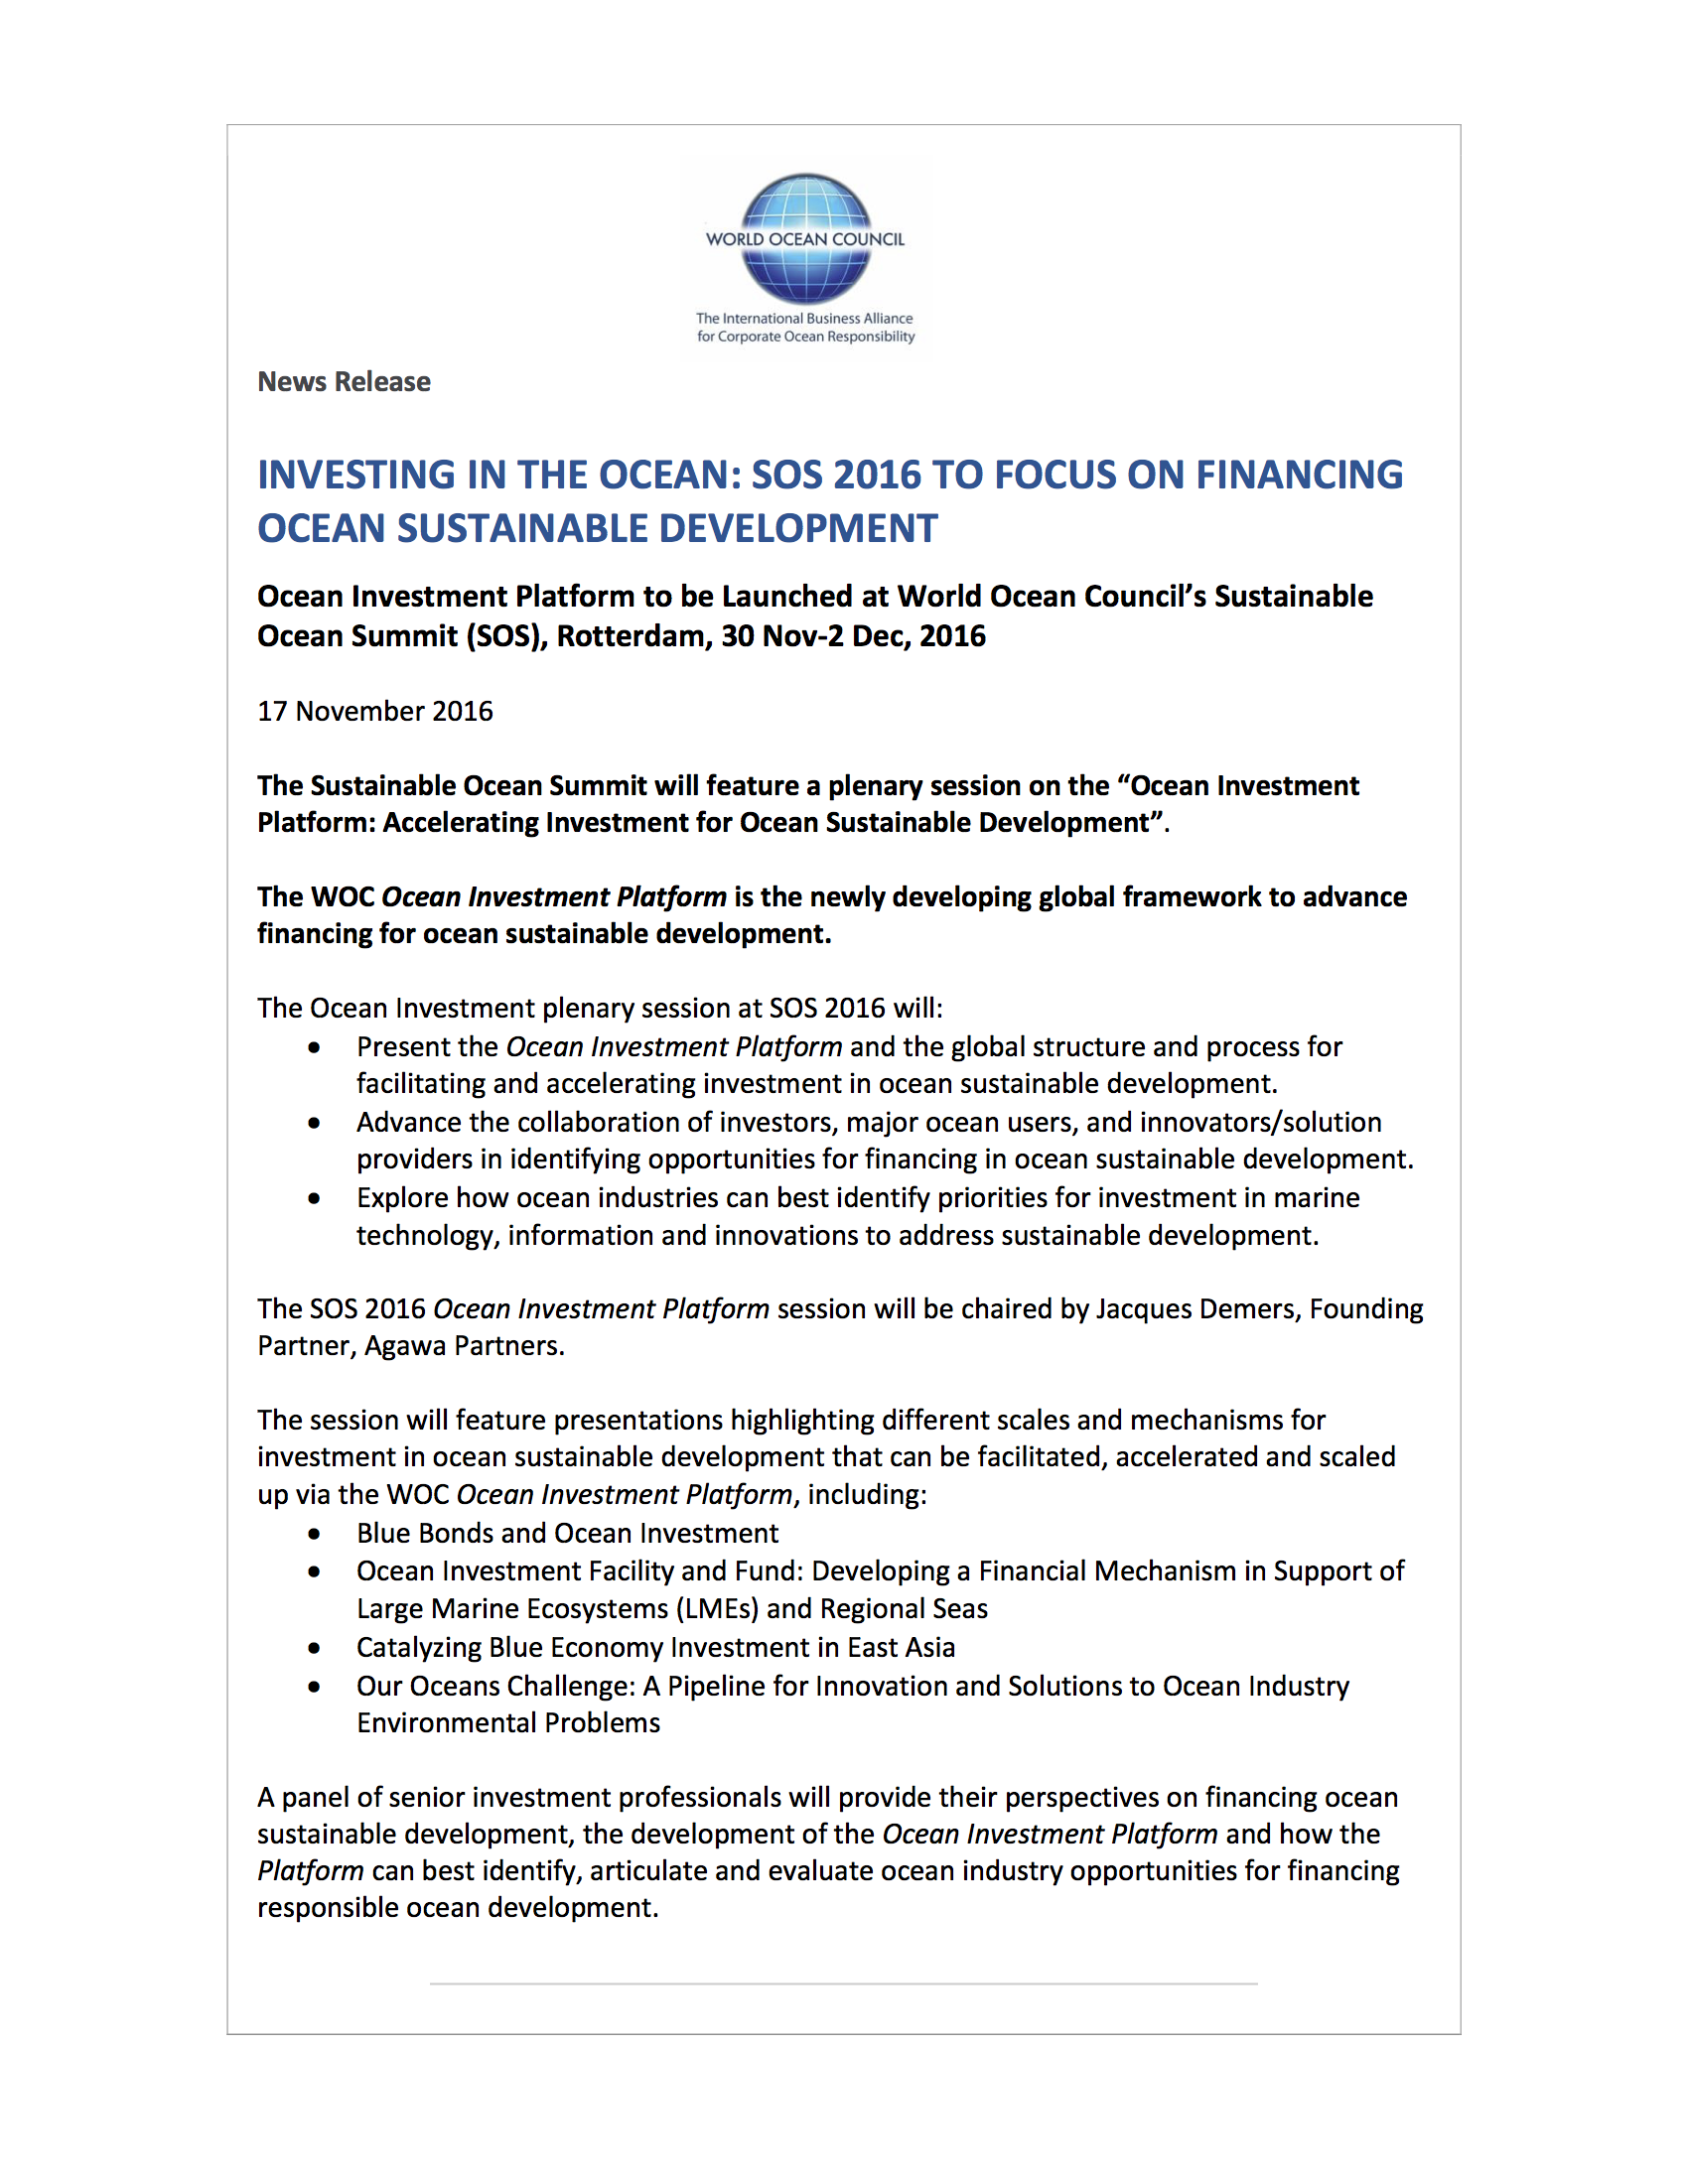 https://www.oceancouncil.org/wp-content/uploads/2016/11/1.-WOC-News-Release-2016-11-17-Investing-in-the-Ocean